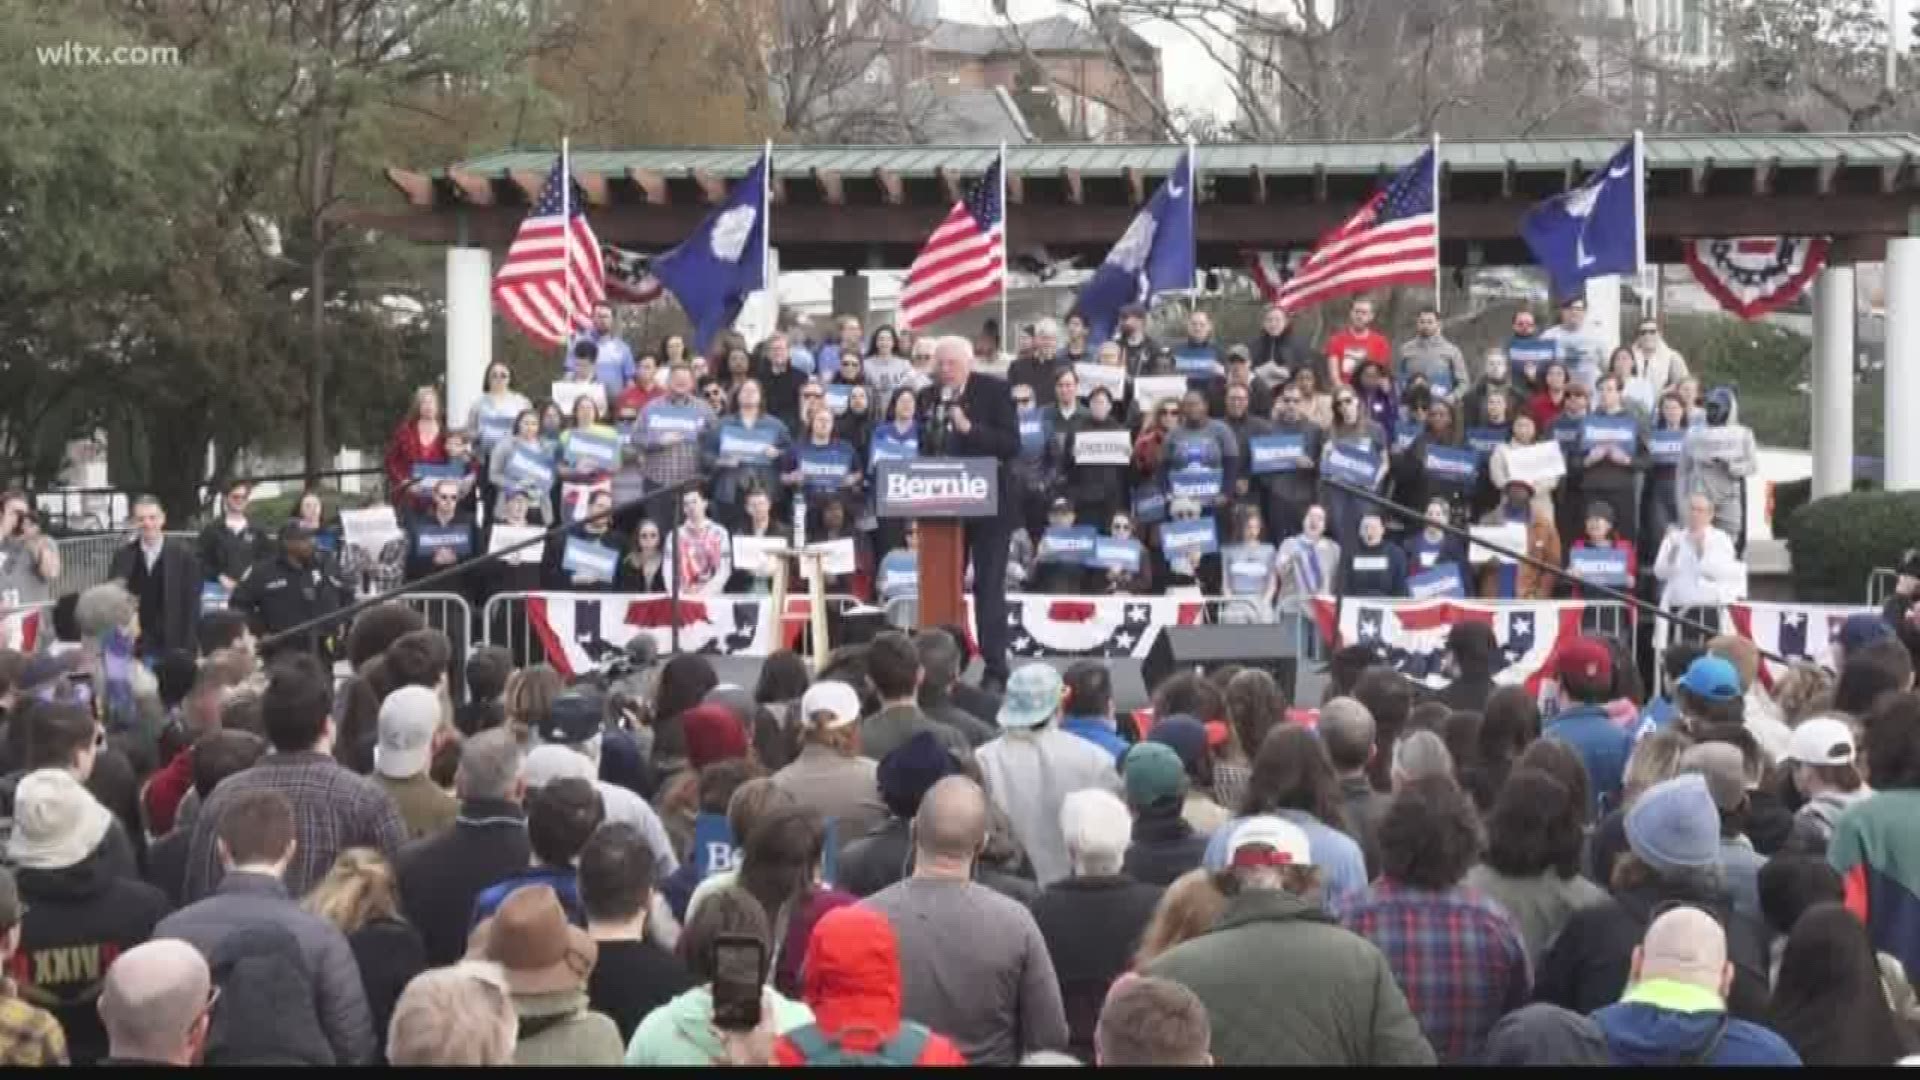 Bernie Sanders encouraged voter turnout while speaking at Finlay Park on Friday